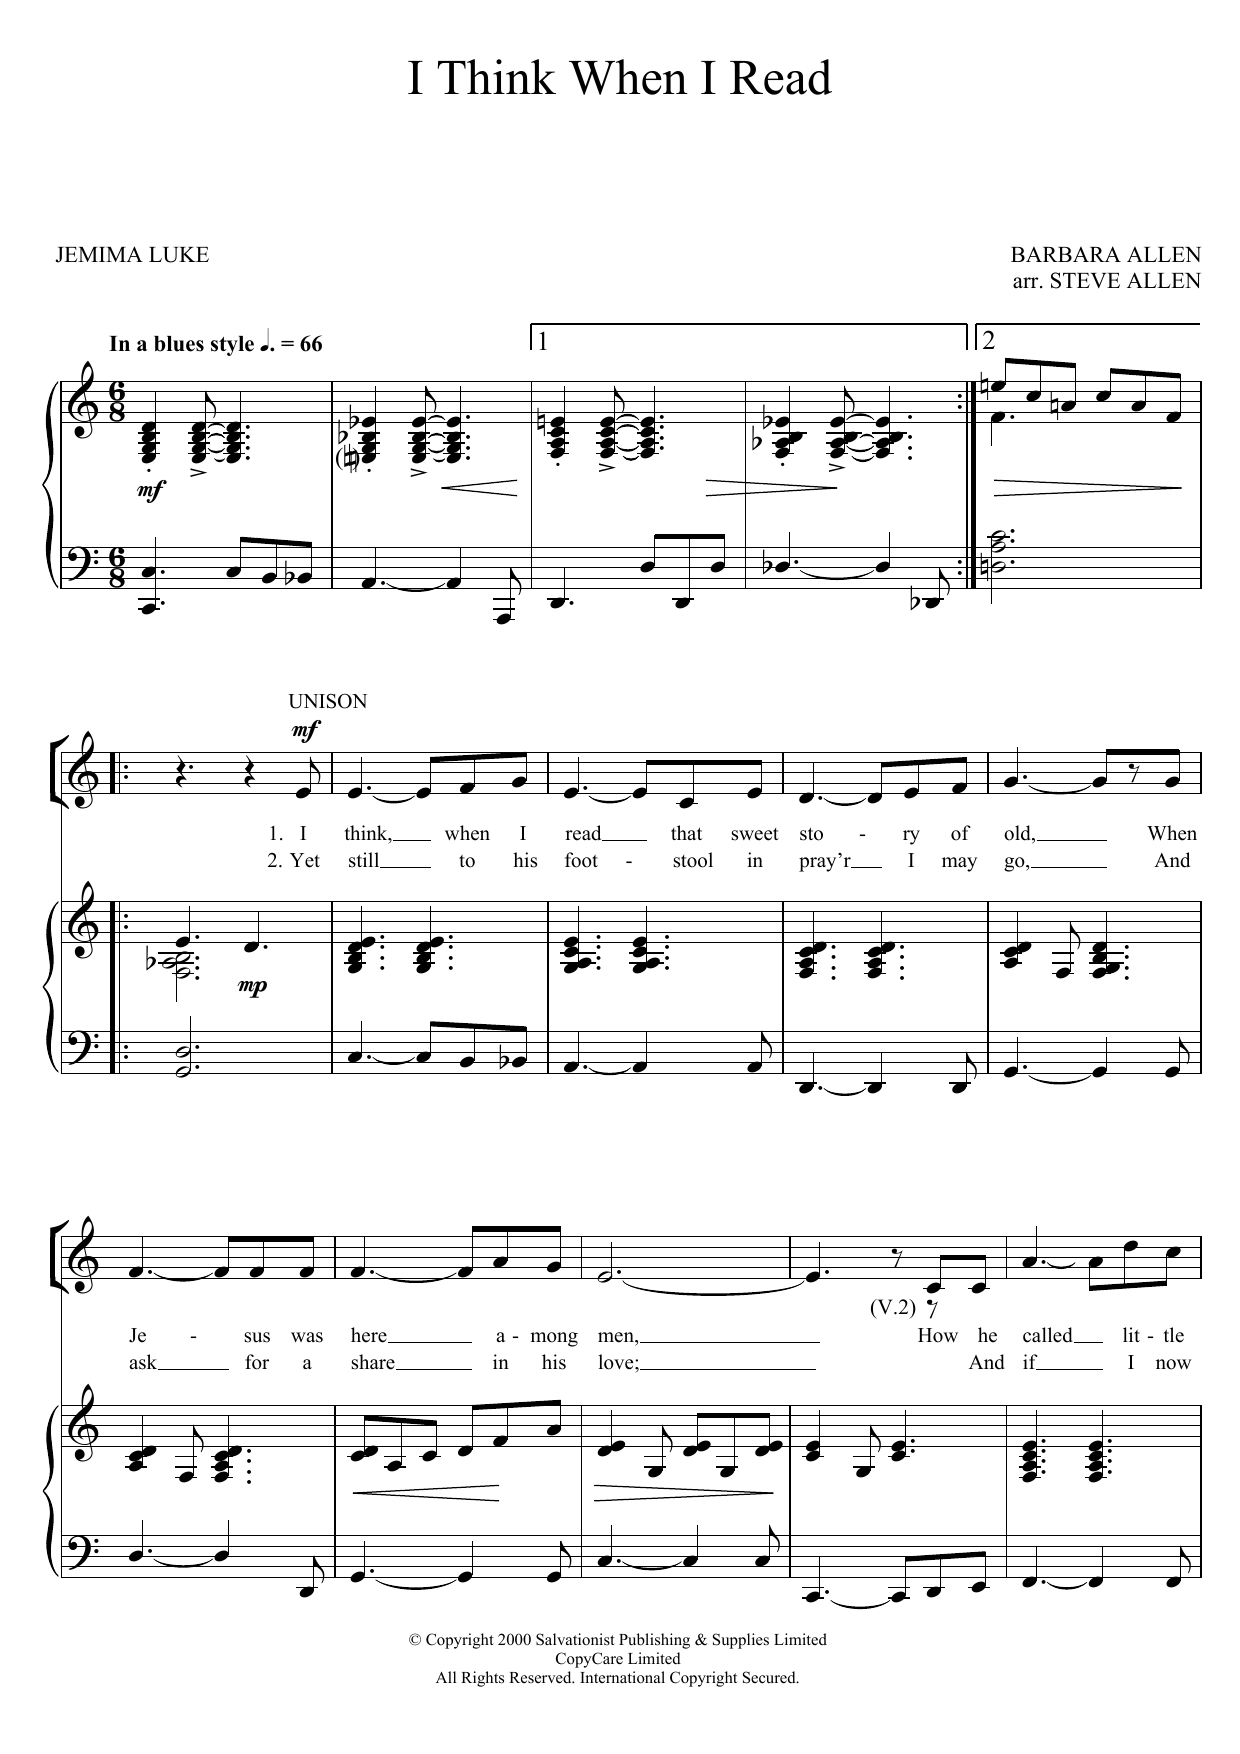 Download The Salvation Army I Think When I Read Sheet Music